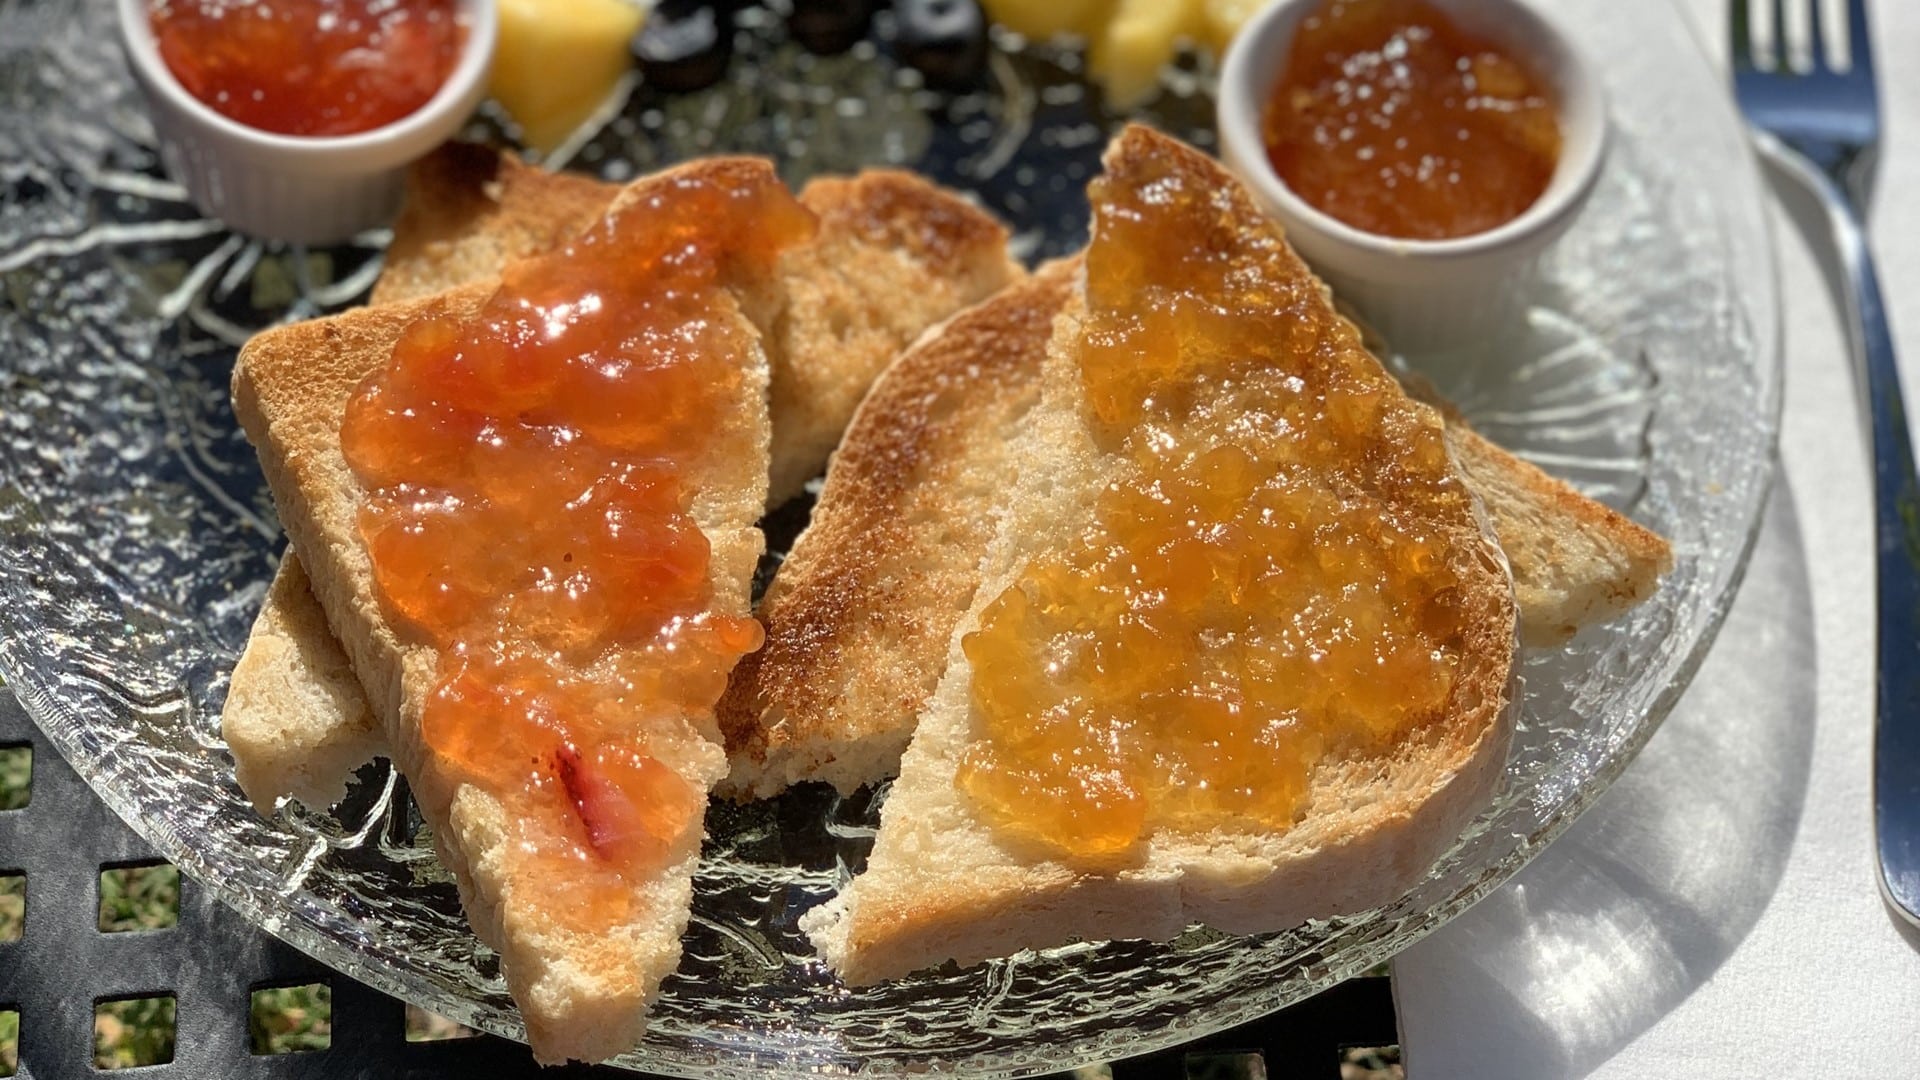 Toast with colorful jams and some fruit in the background